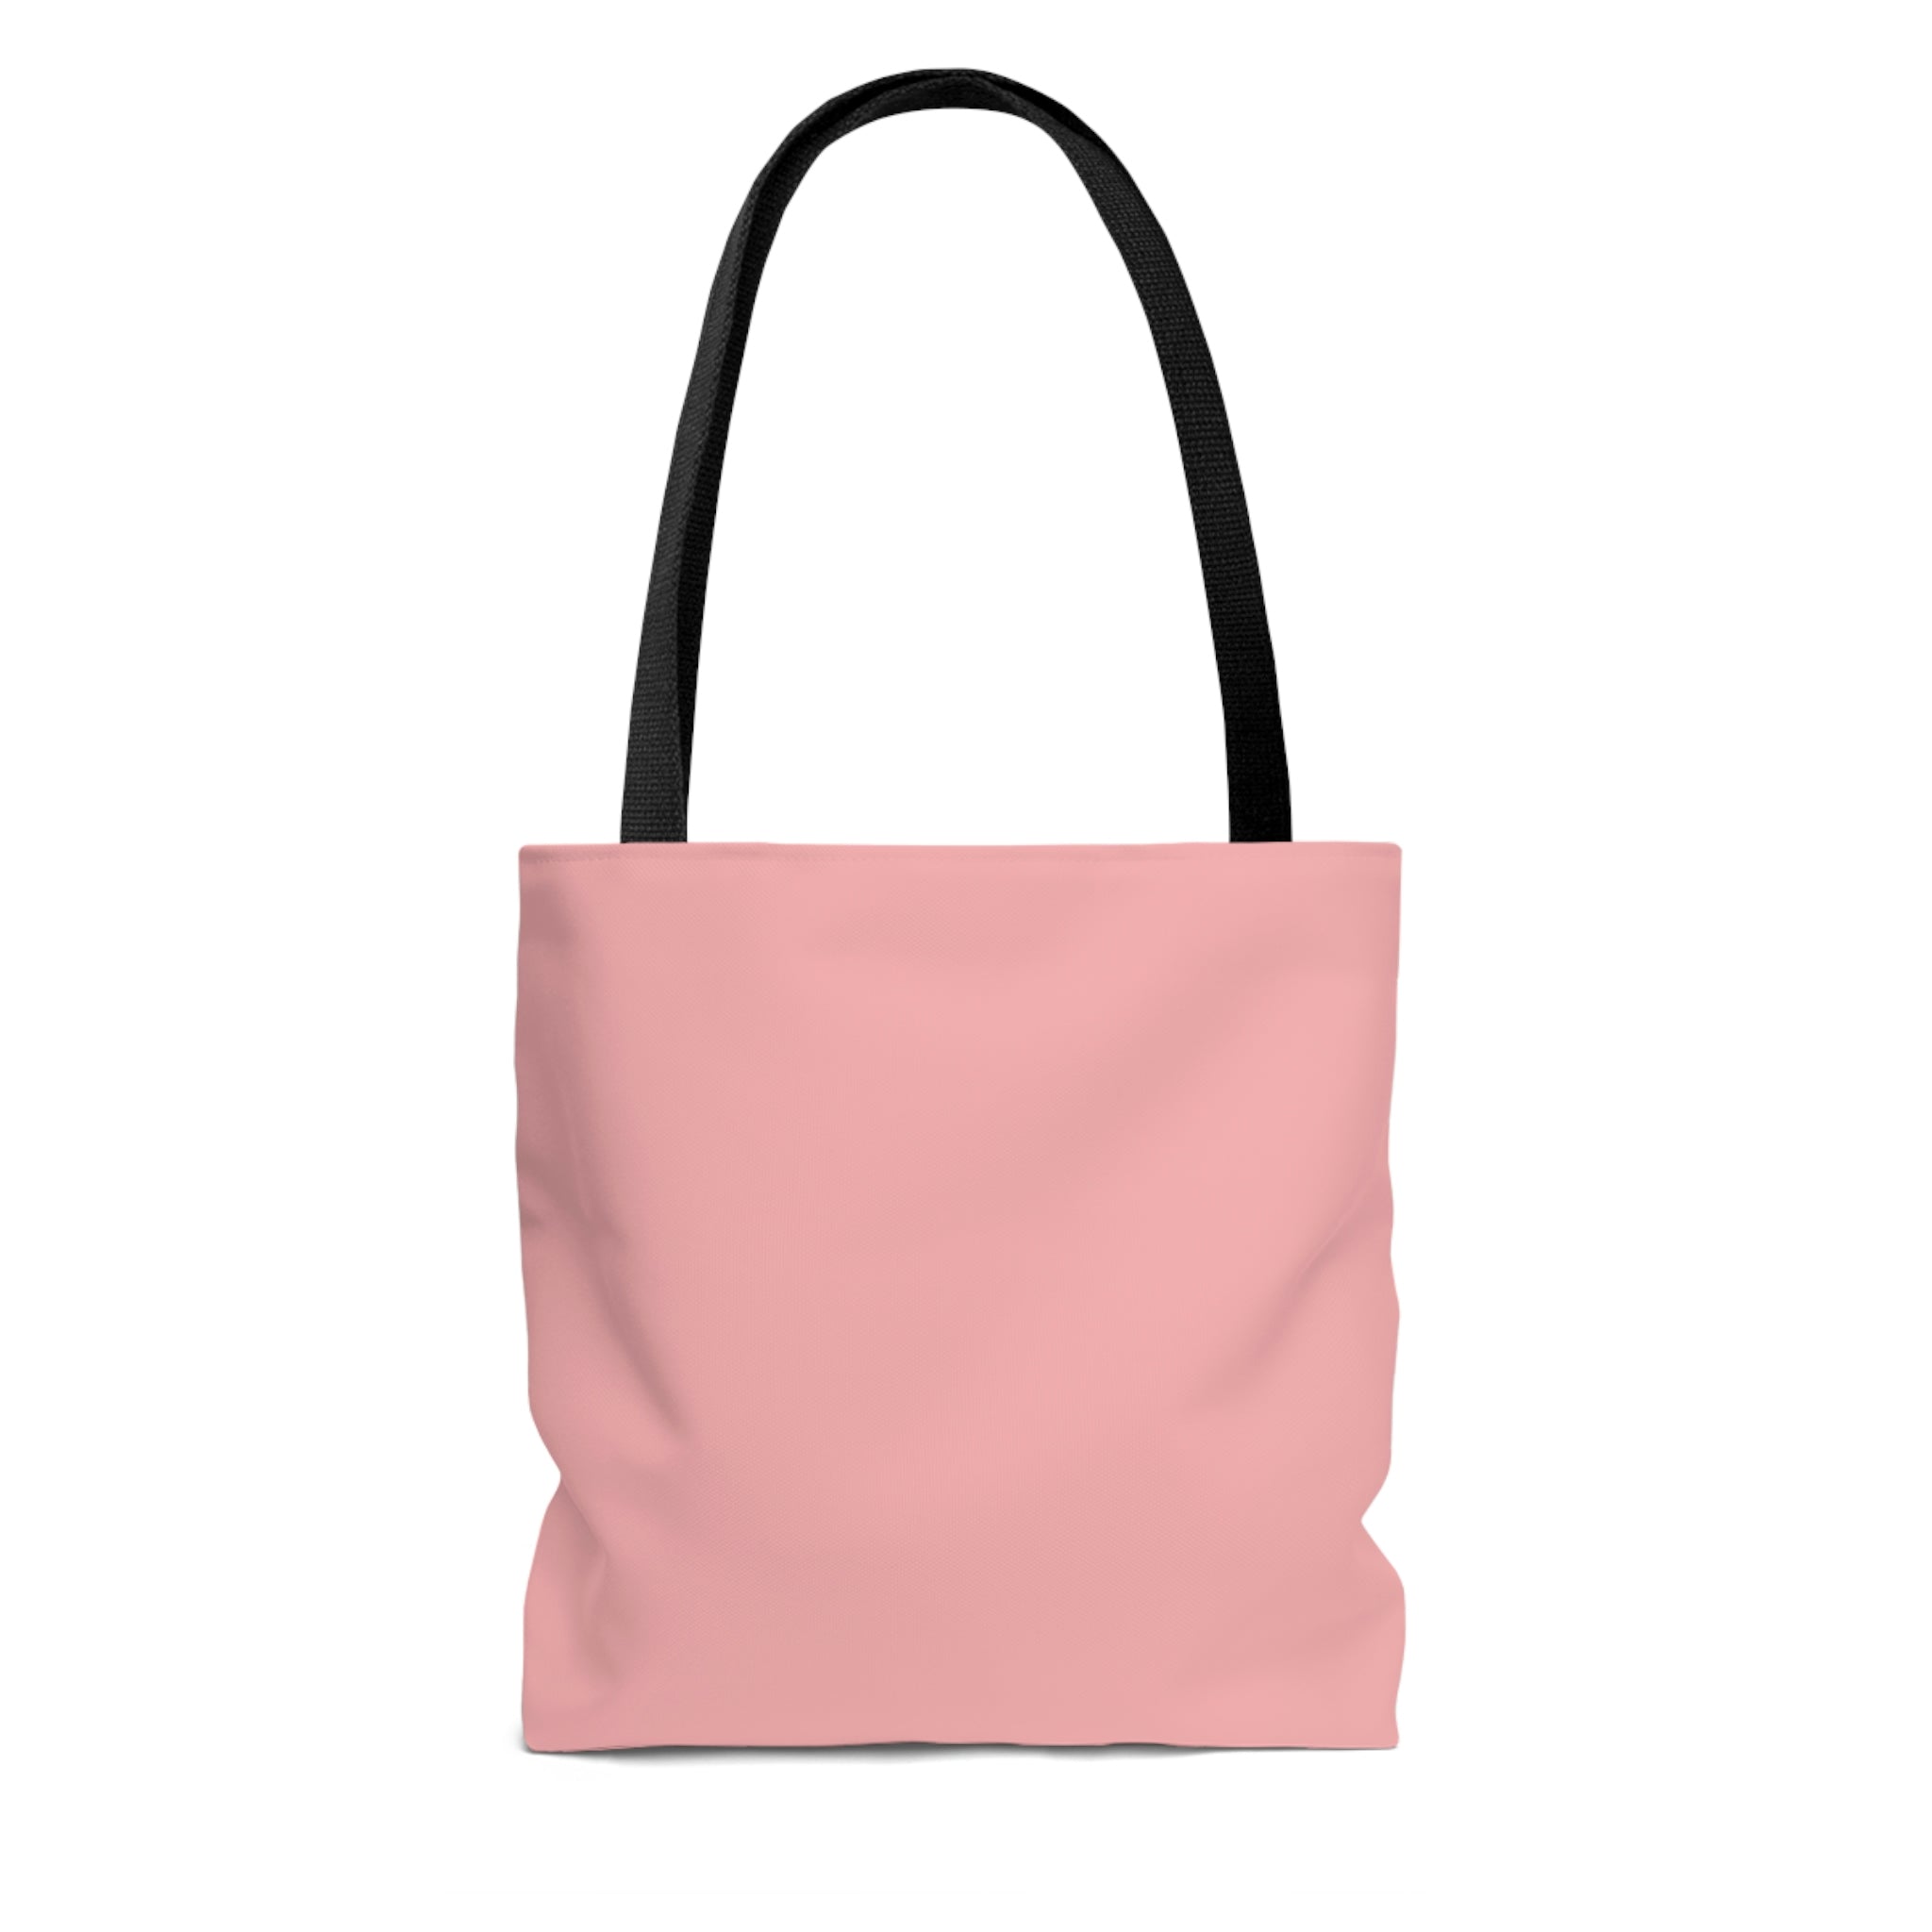 Taupe Pink Plain Solid Color Tote Bag for Sale by SqueakyRicardo